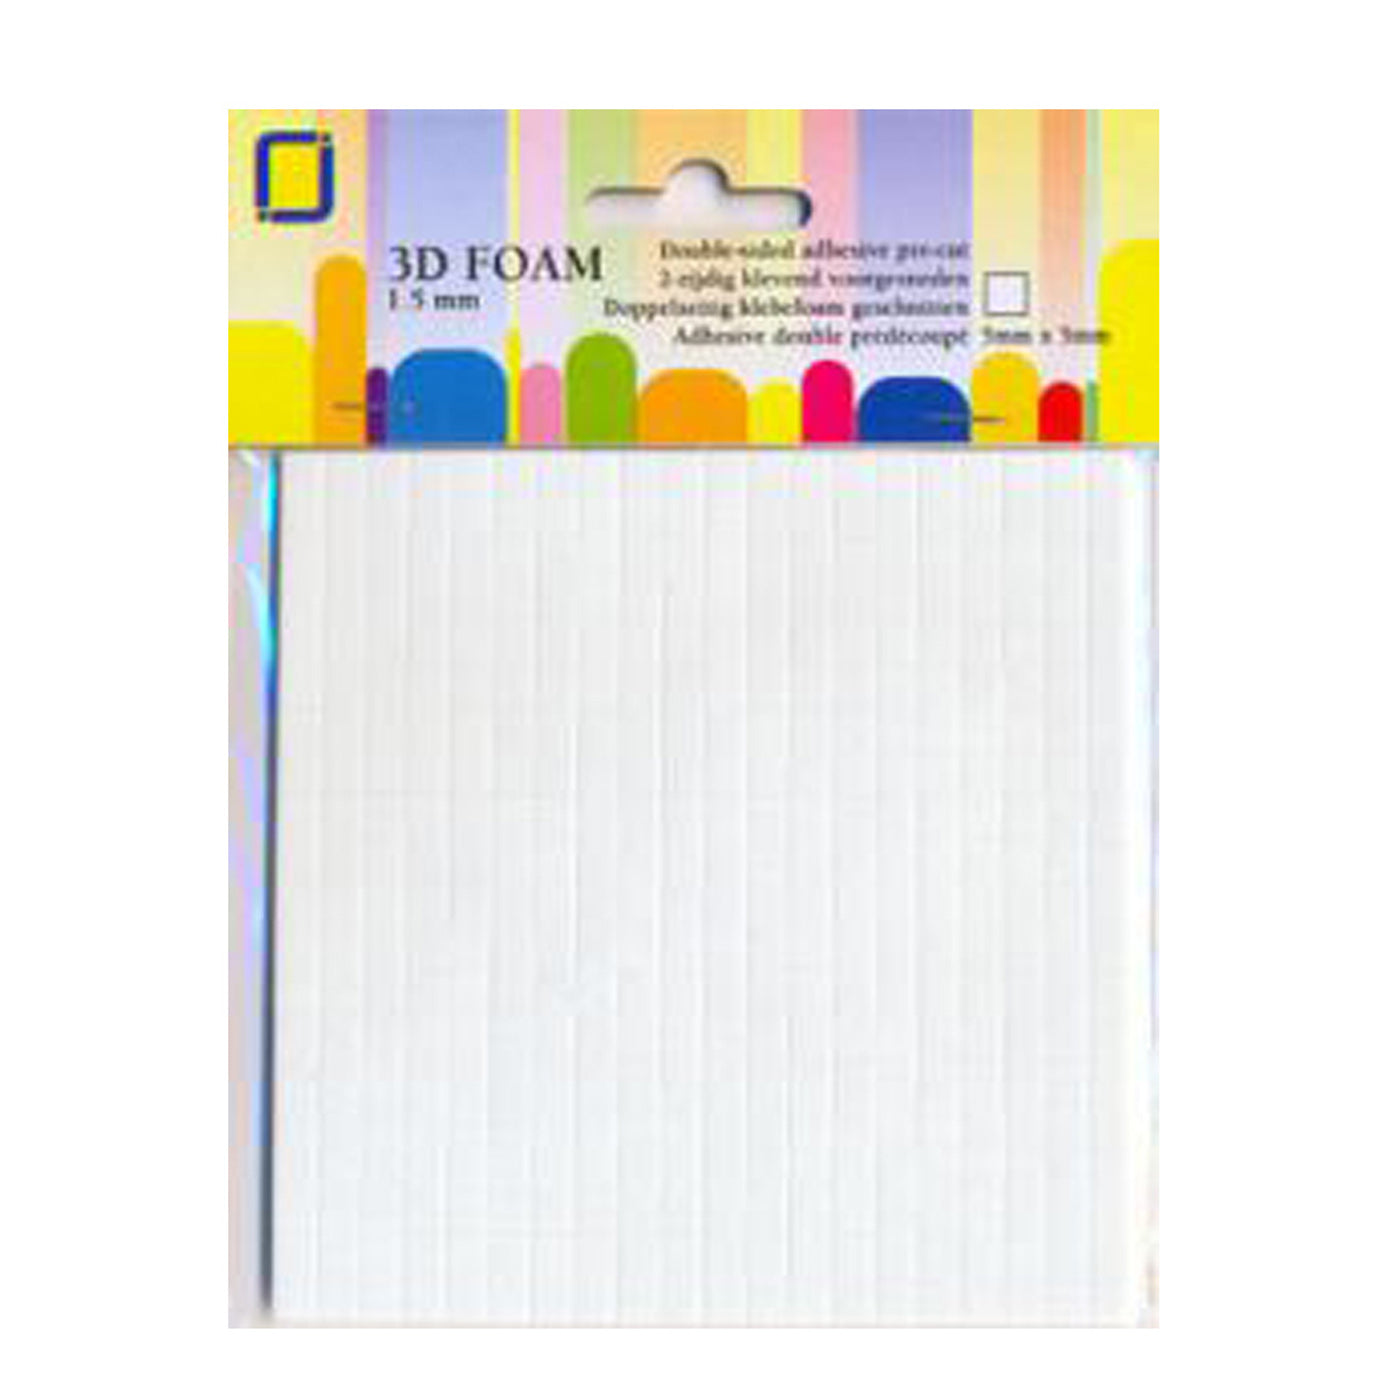 3D Foam Double-Sided Adhesive Pads